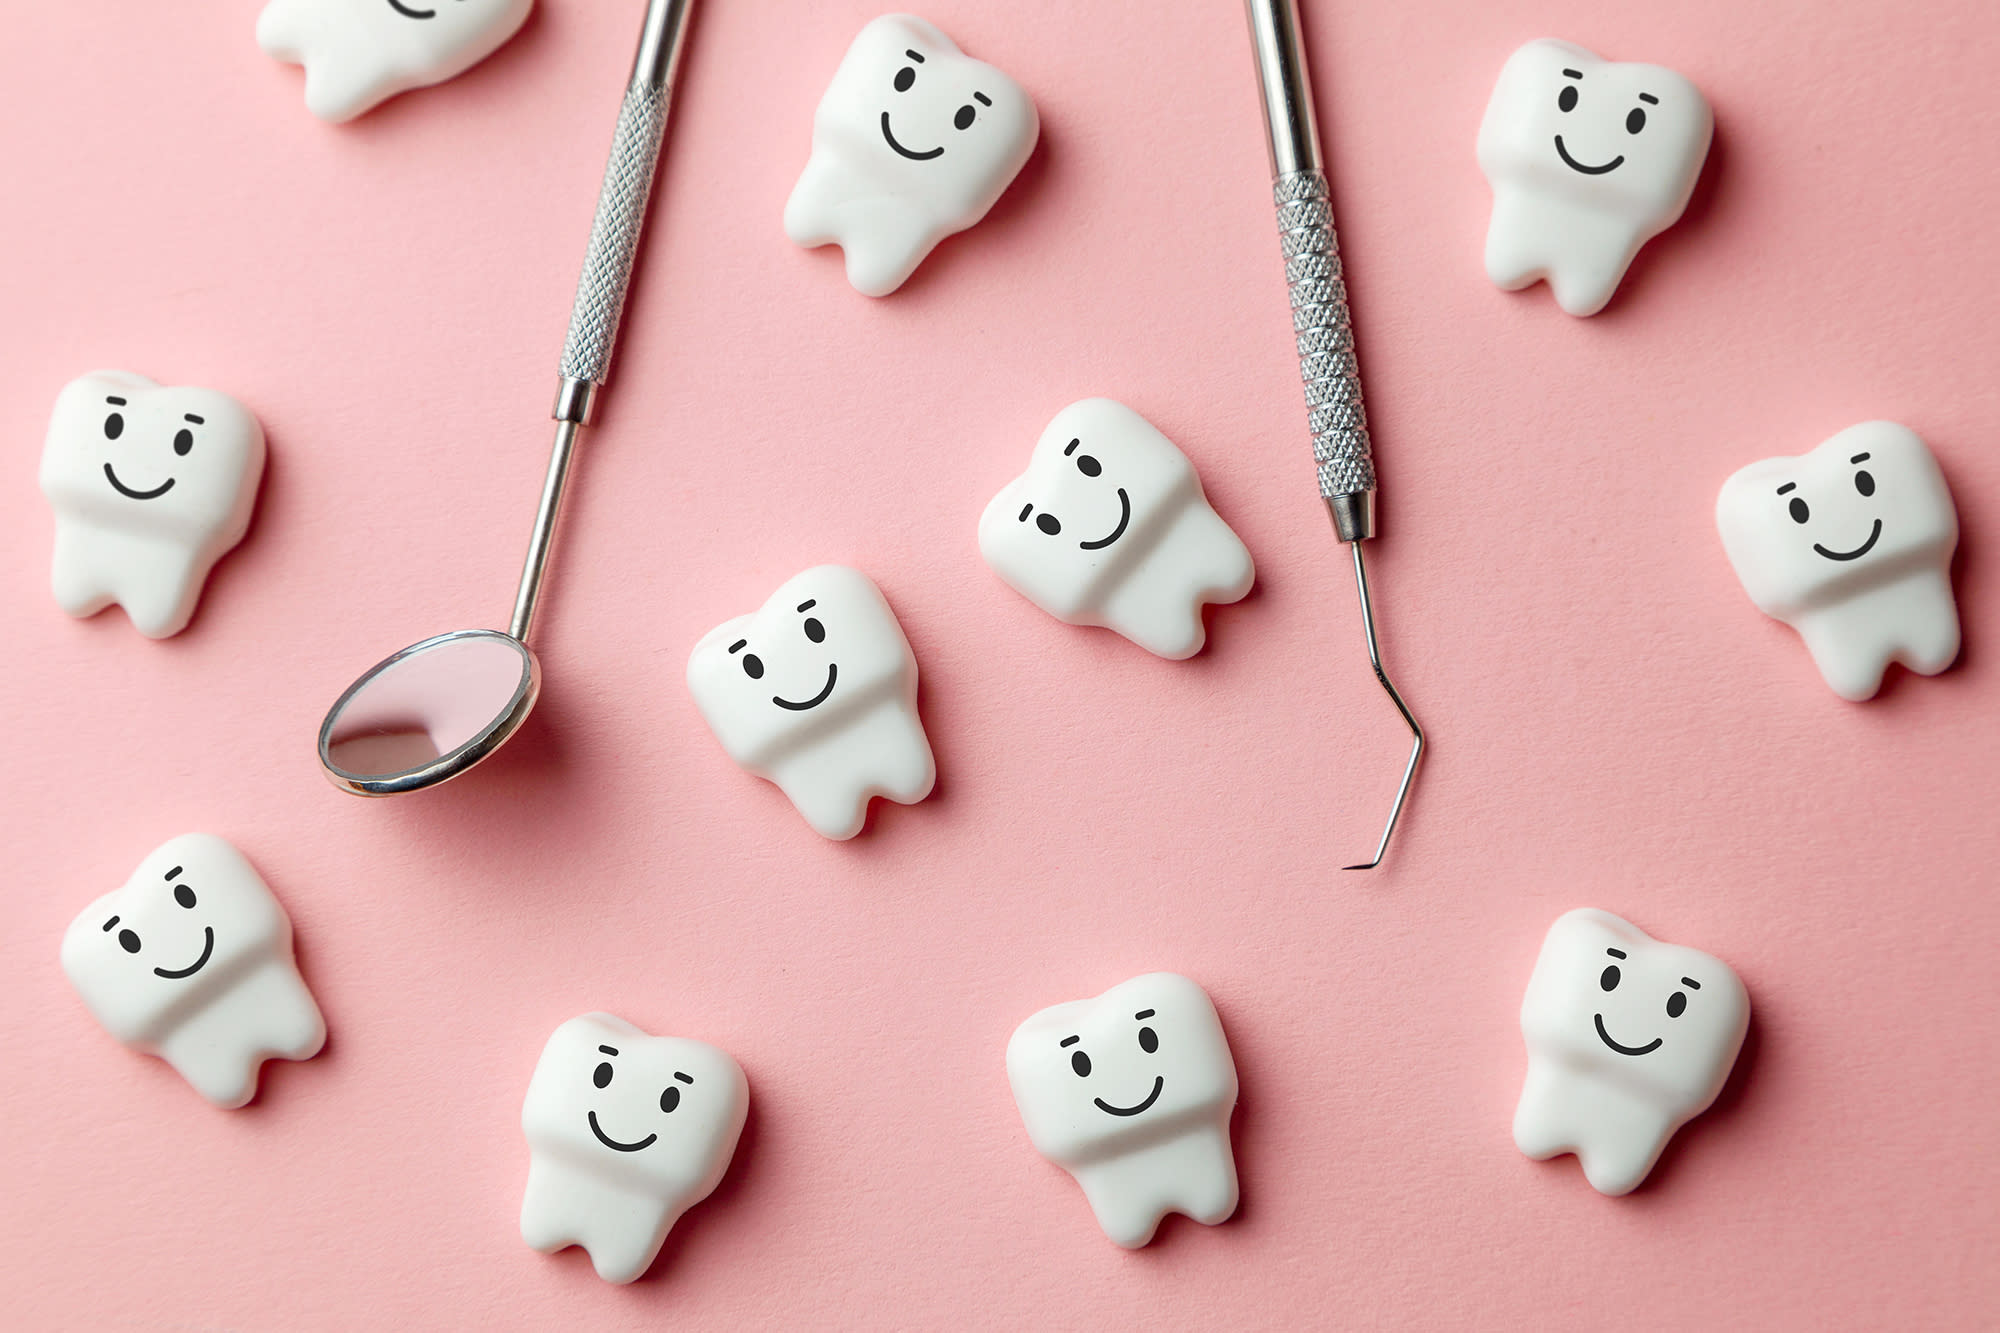 Getting regular dental cleanings can help protect your teeth and gums and prevent serious future dental problems.¹